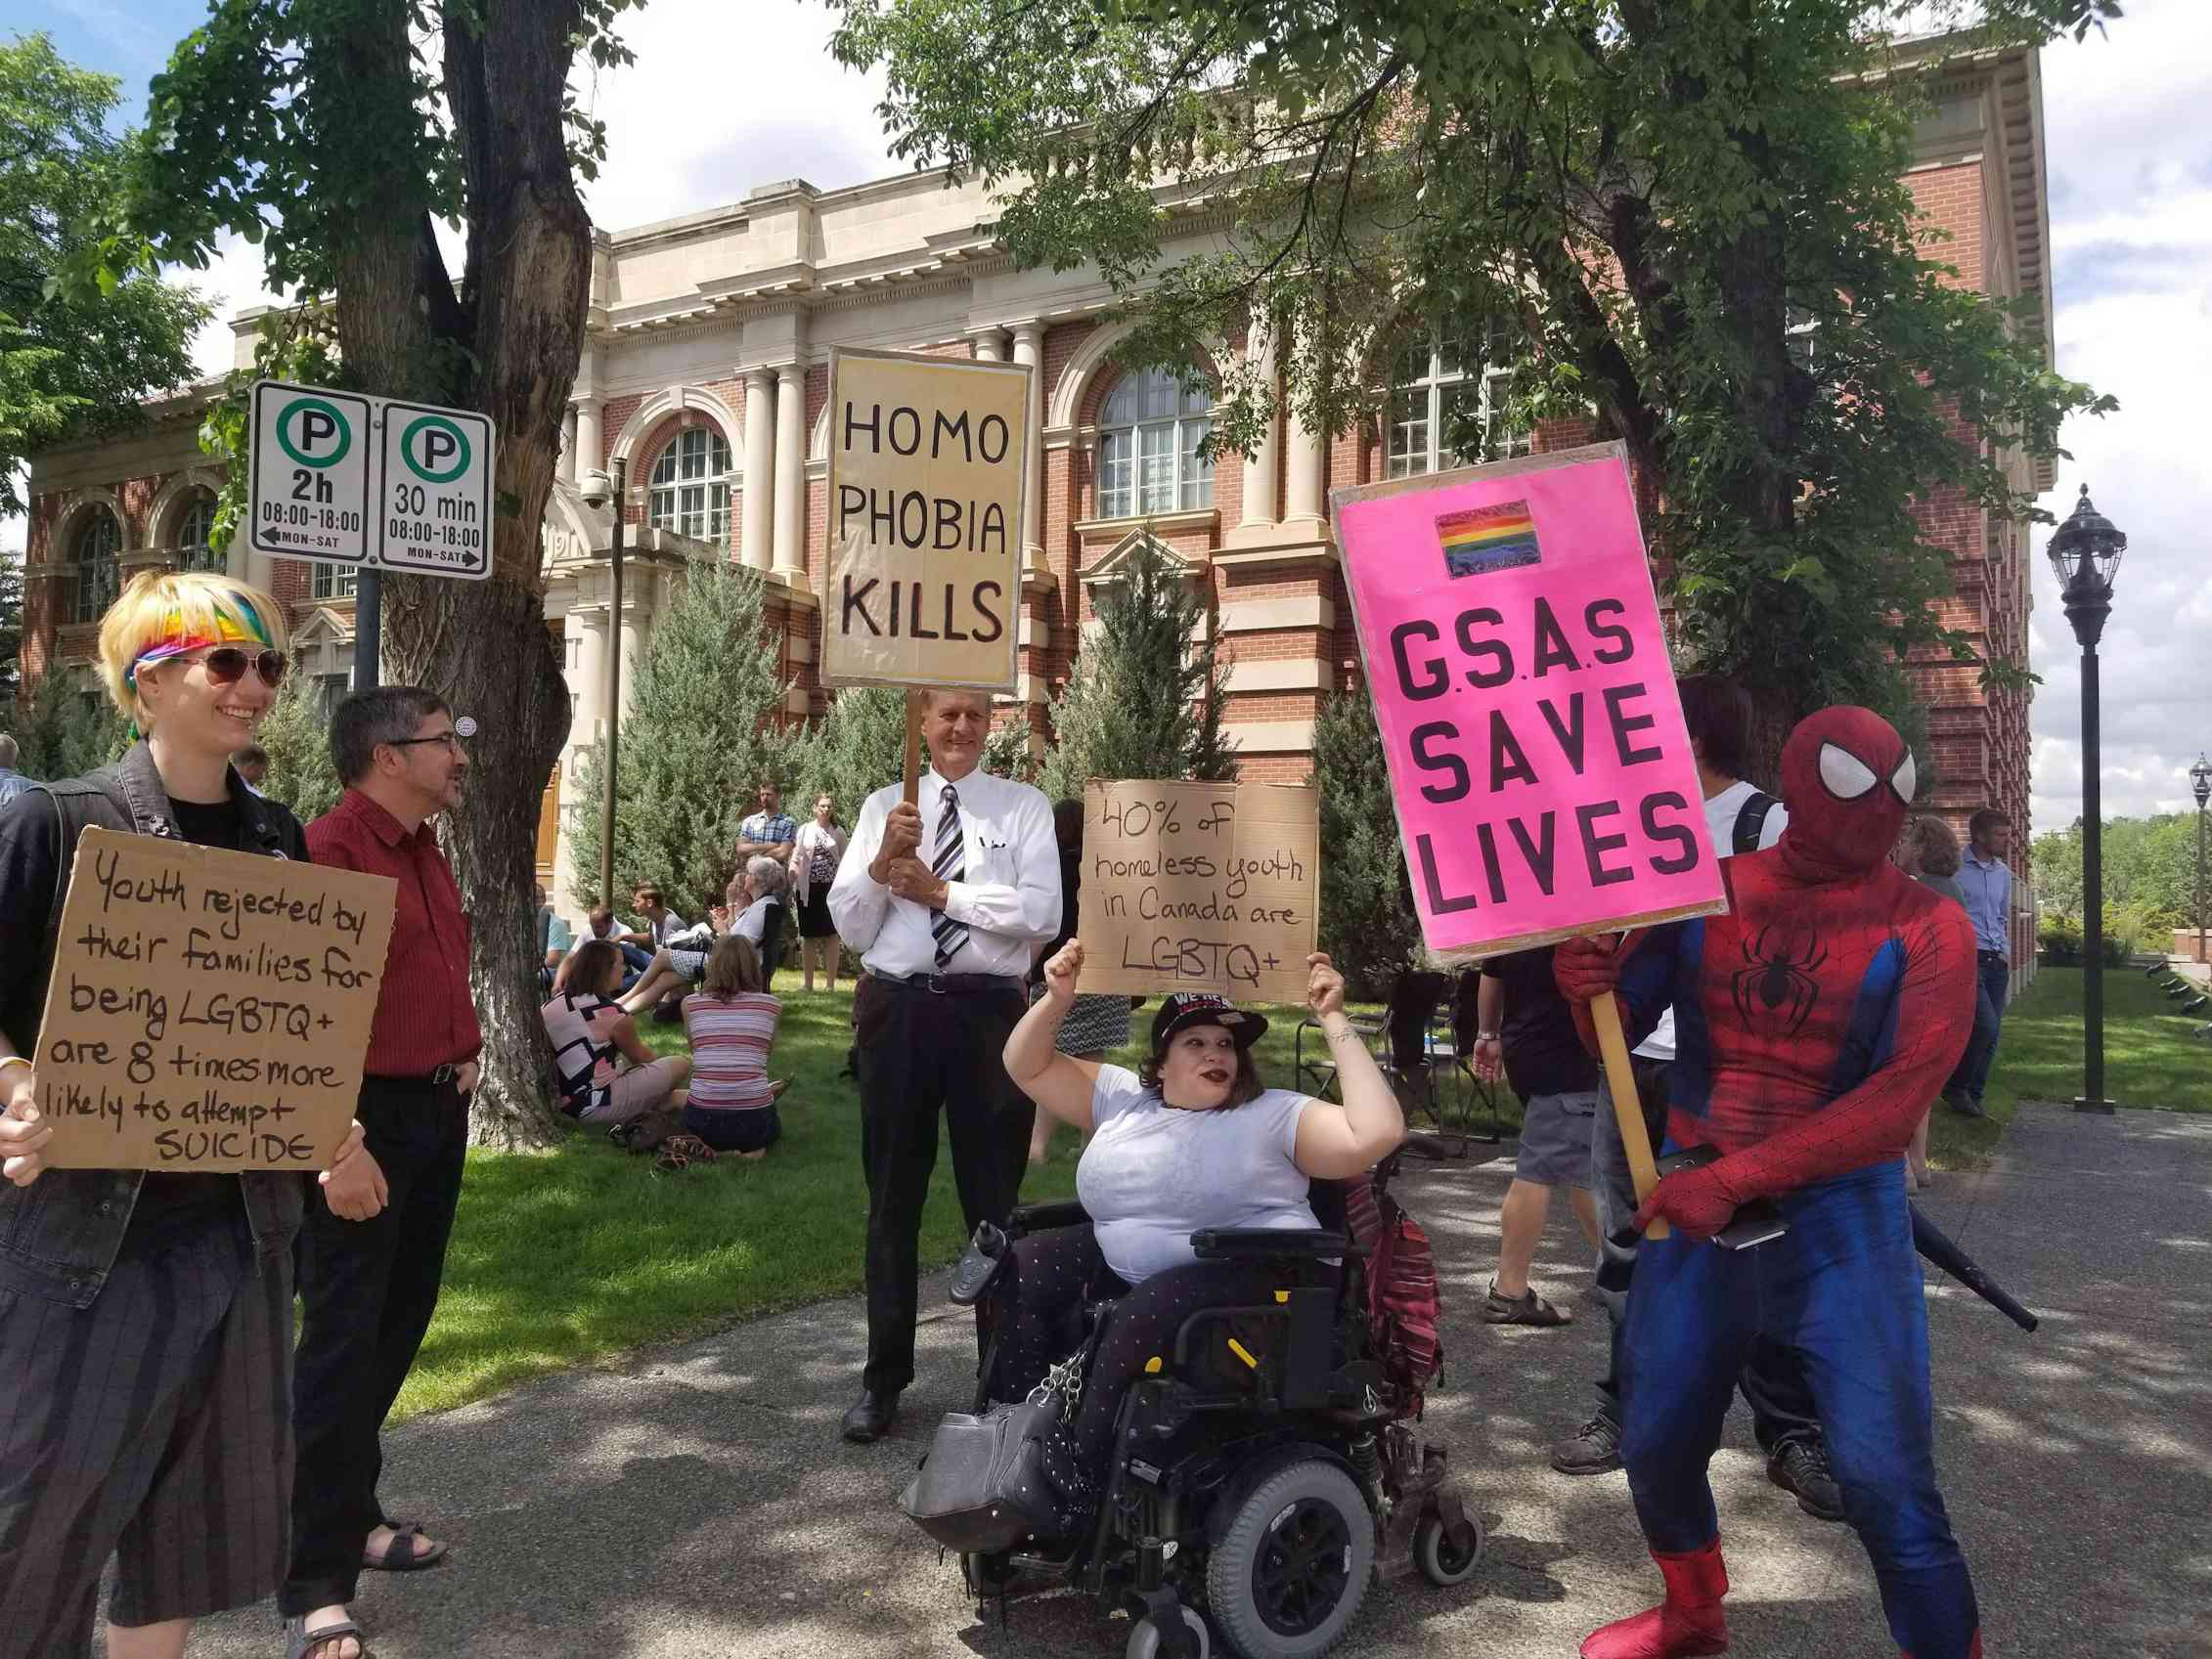 A group of people, including a person in a wheelchair, hold signs urging the protection of gay-straight alliances.